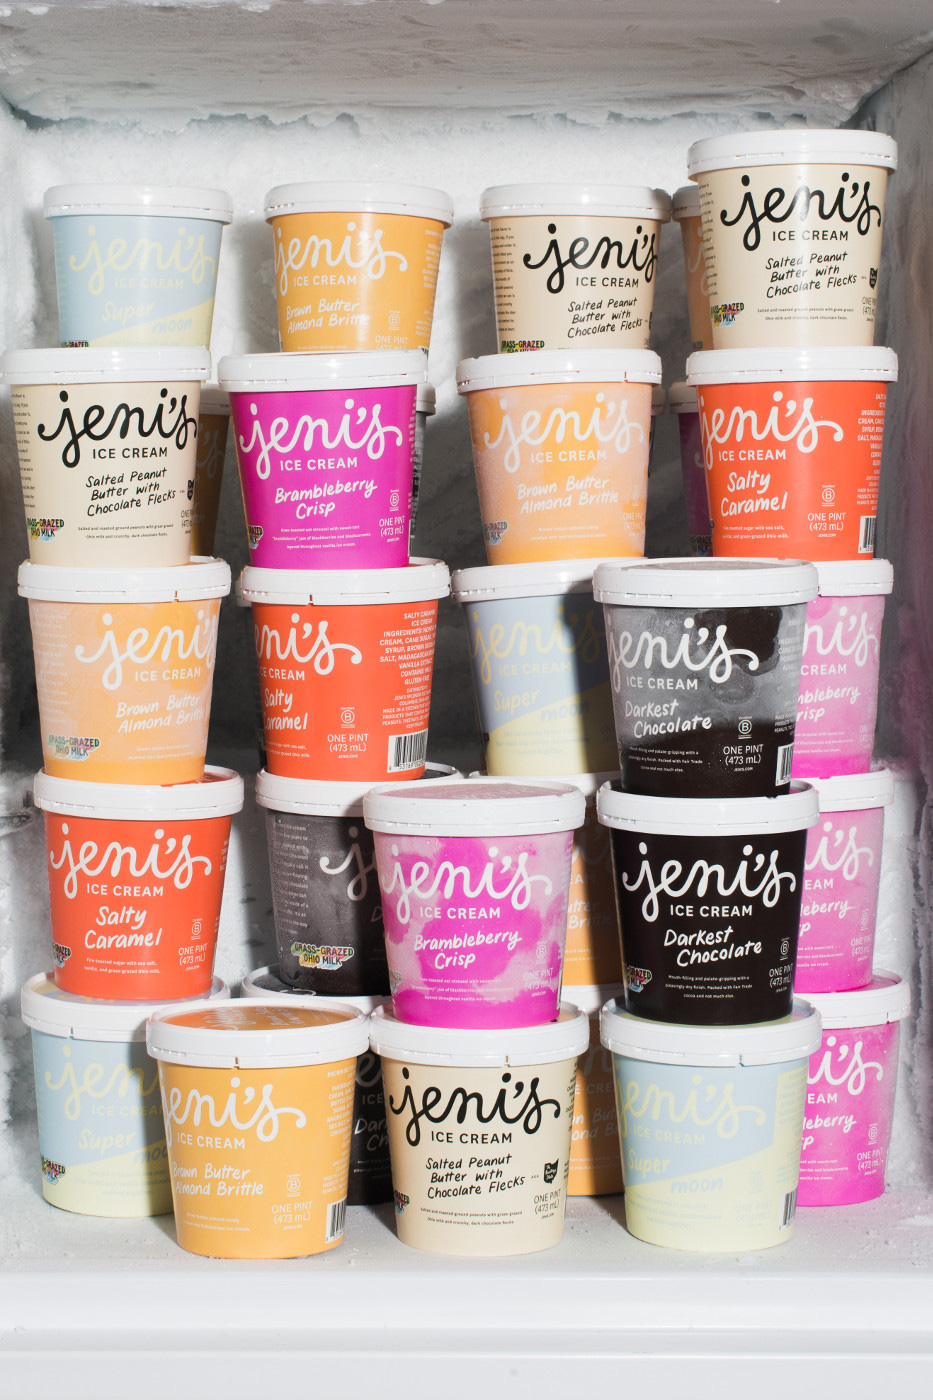 New Logo by Jessica Hische and Packaging done In-house for Jeni's Splendid Ice Creams